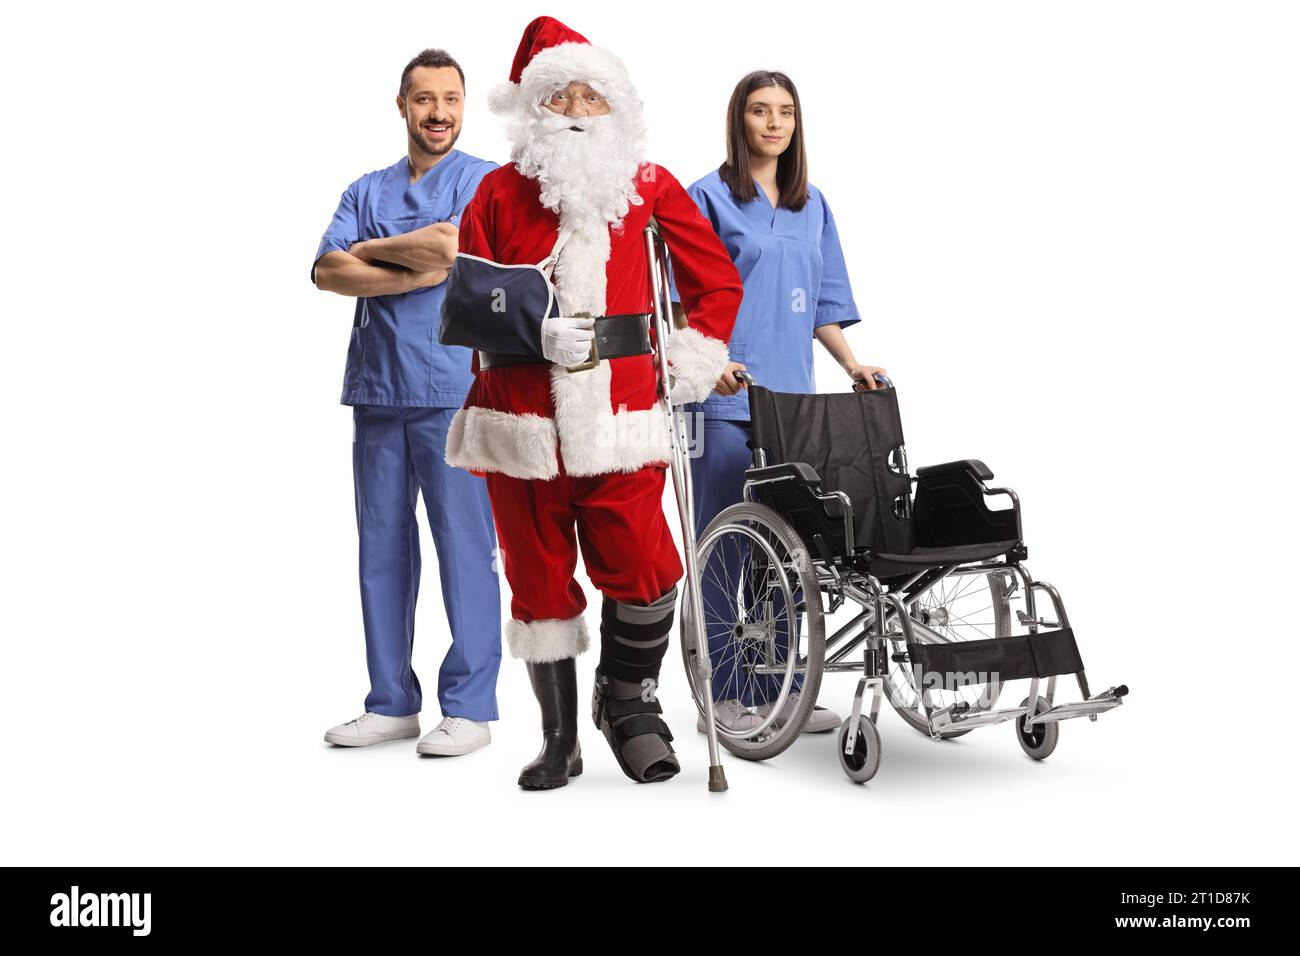 Injured santa claus with a foot brace and arm sling standing with a medical team isolated on white background Stock Photo